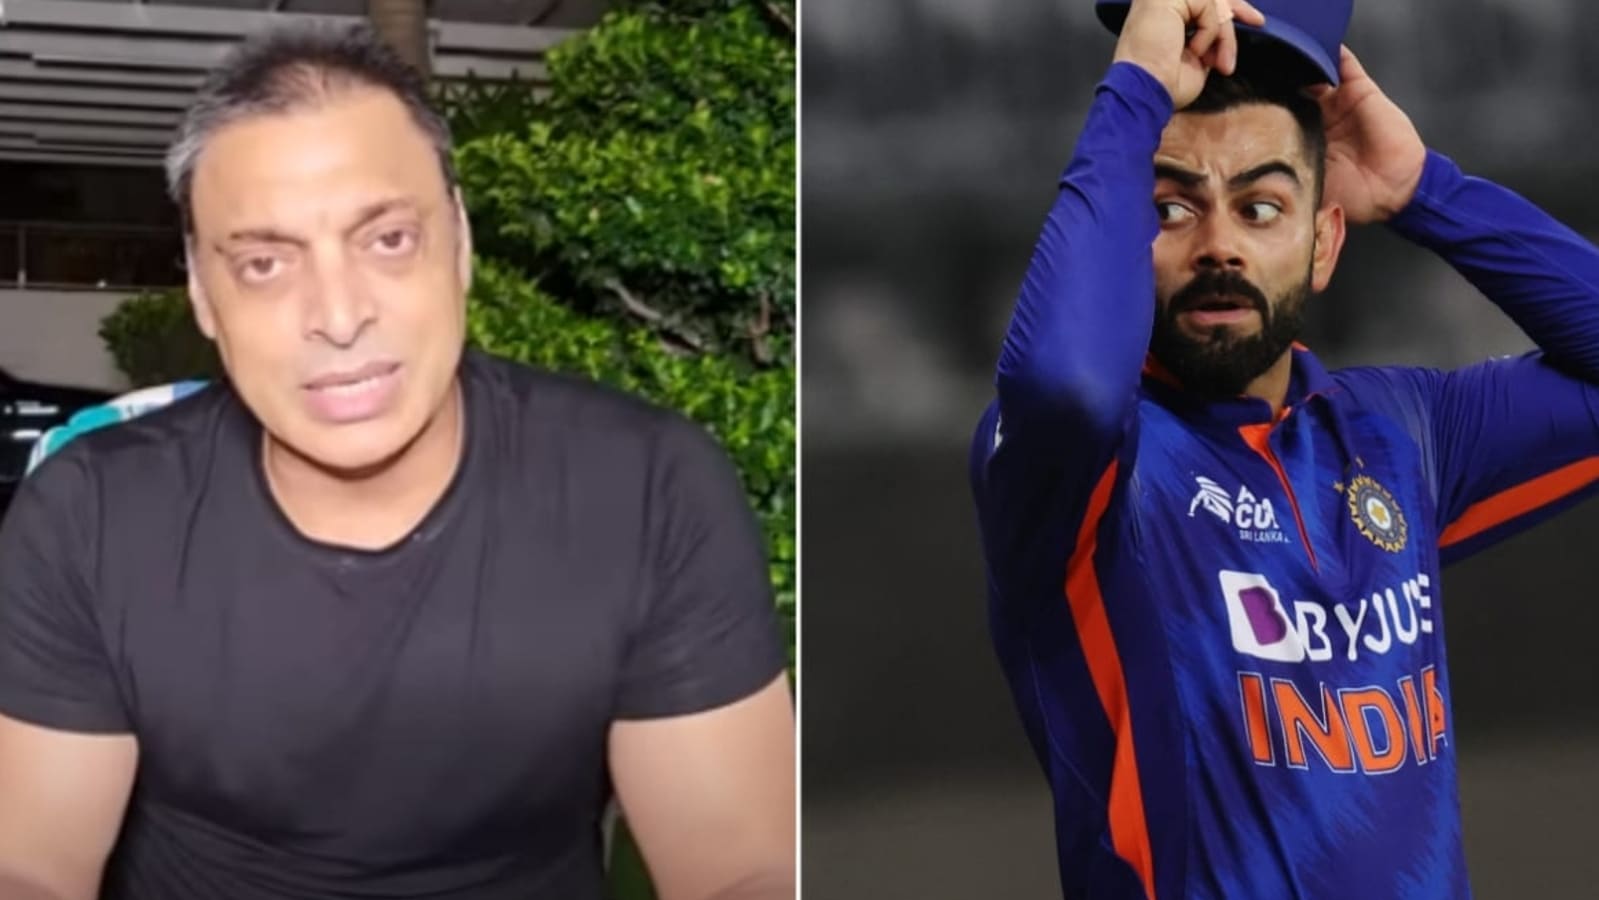 i-want-him-to-retire-from-t20is-because-shoaib-akhtar-after-virat-kohli-takes-down-pakistan-in-famous-india-win